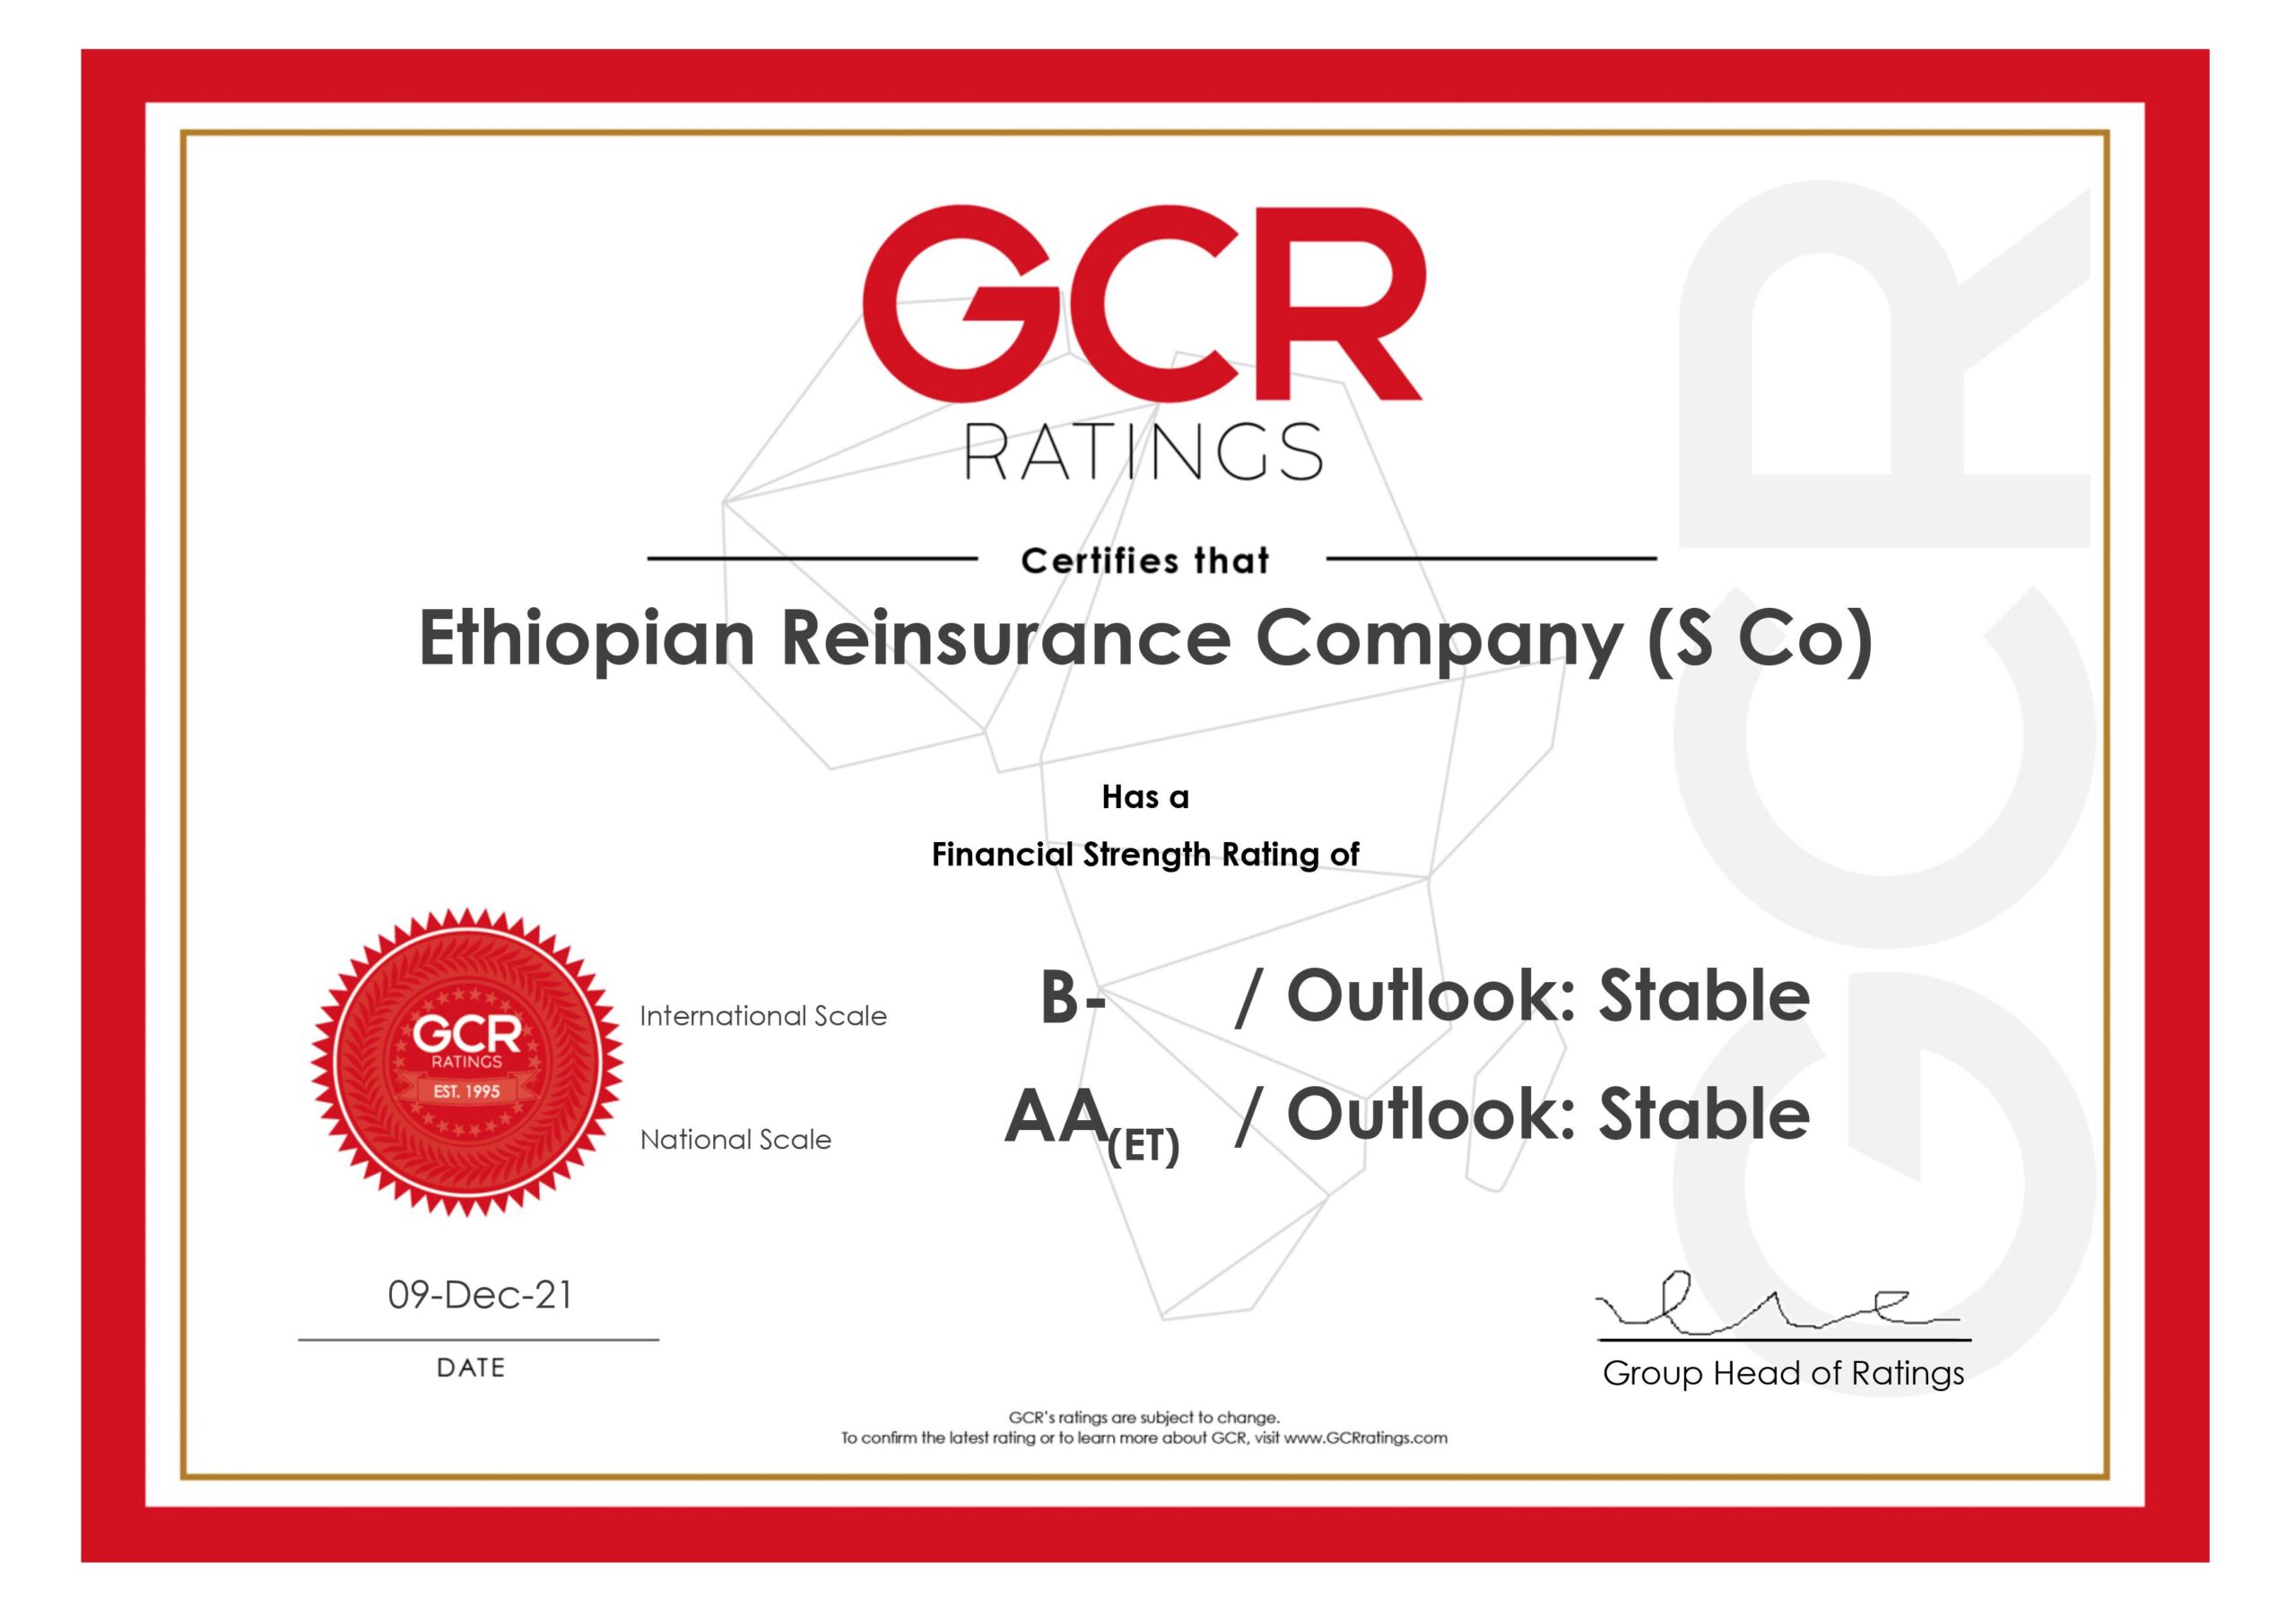 Global Credit Rating (GCR) Affirms Ethio Re initial international and national scale financial strength ratings of B- and AA (ET) respectively; Outlooks Stable.